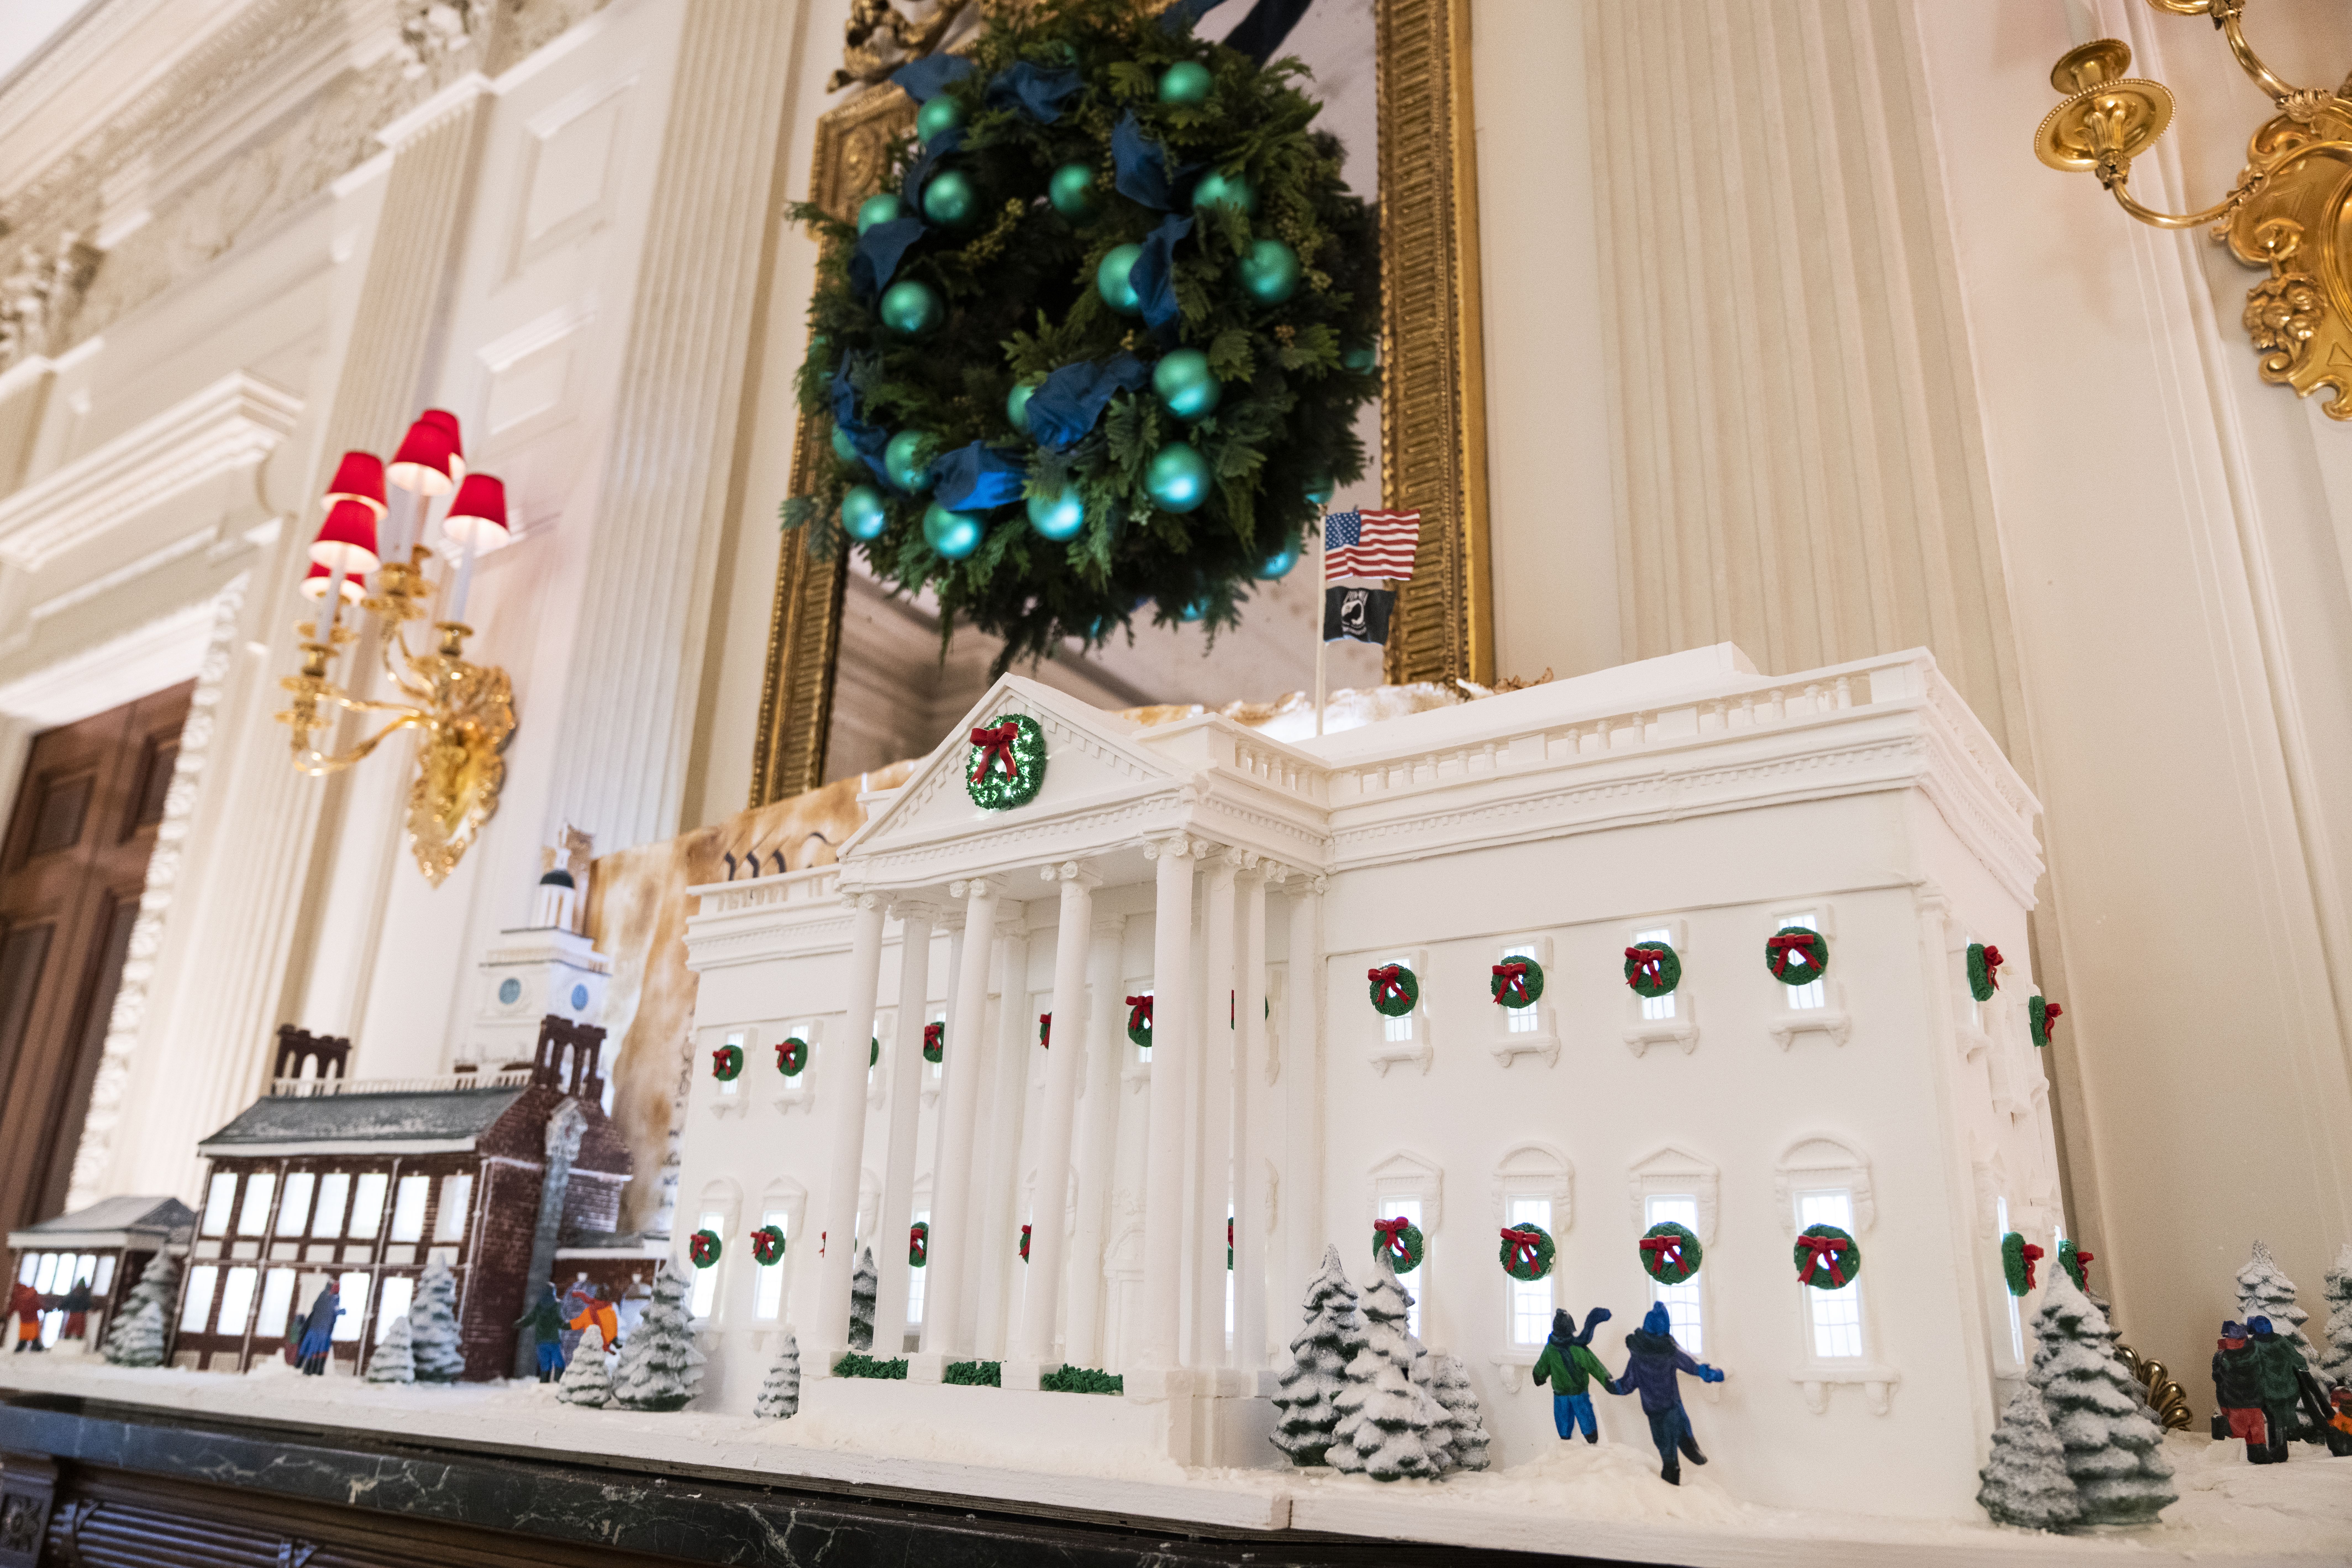 The gingerbread White House in the State Dining room.